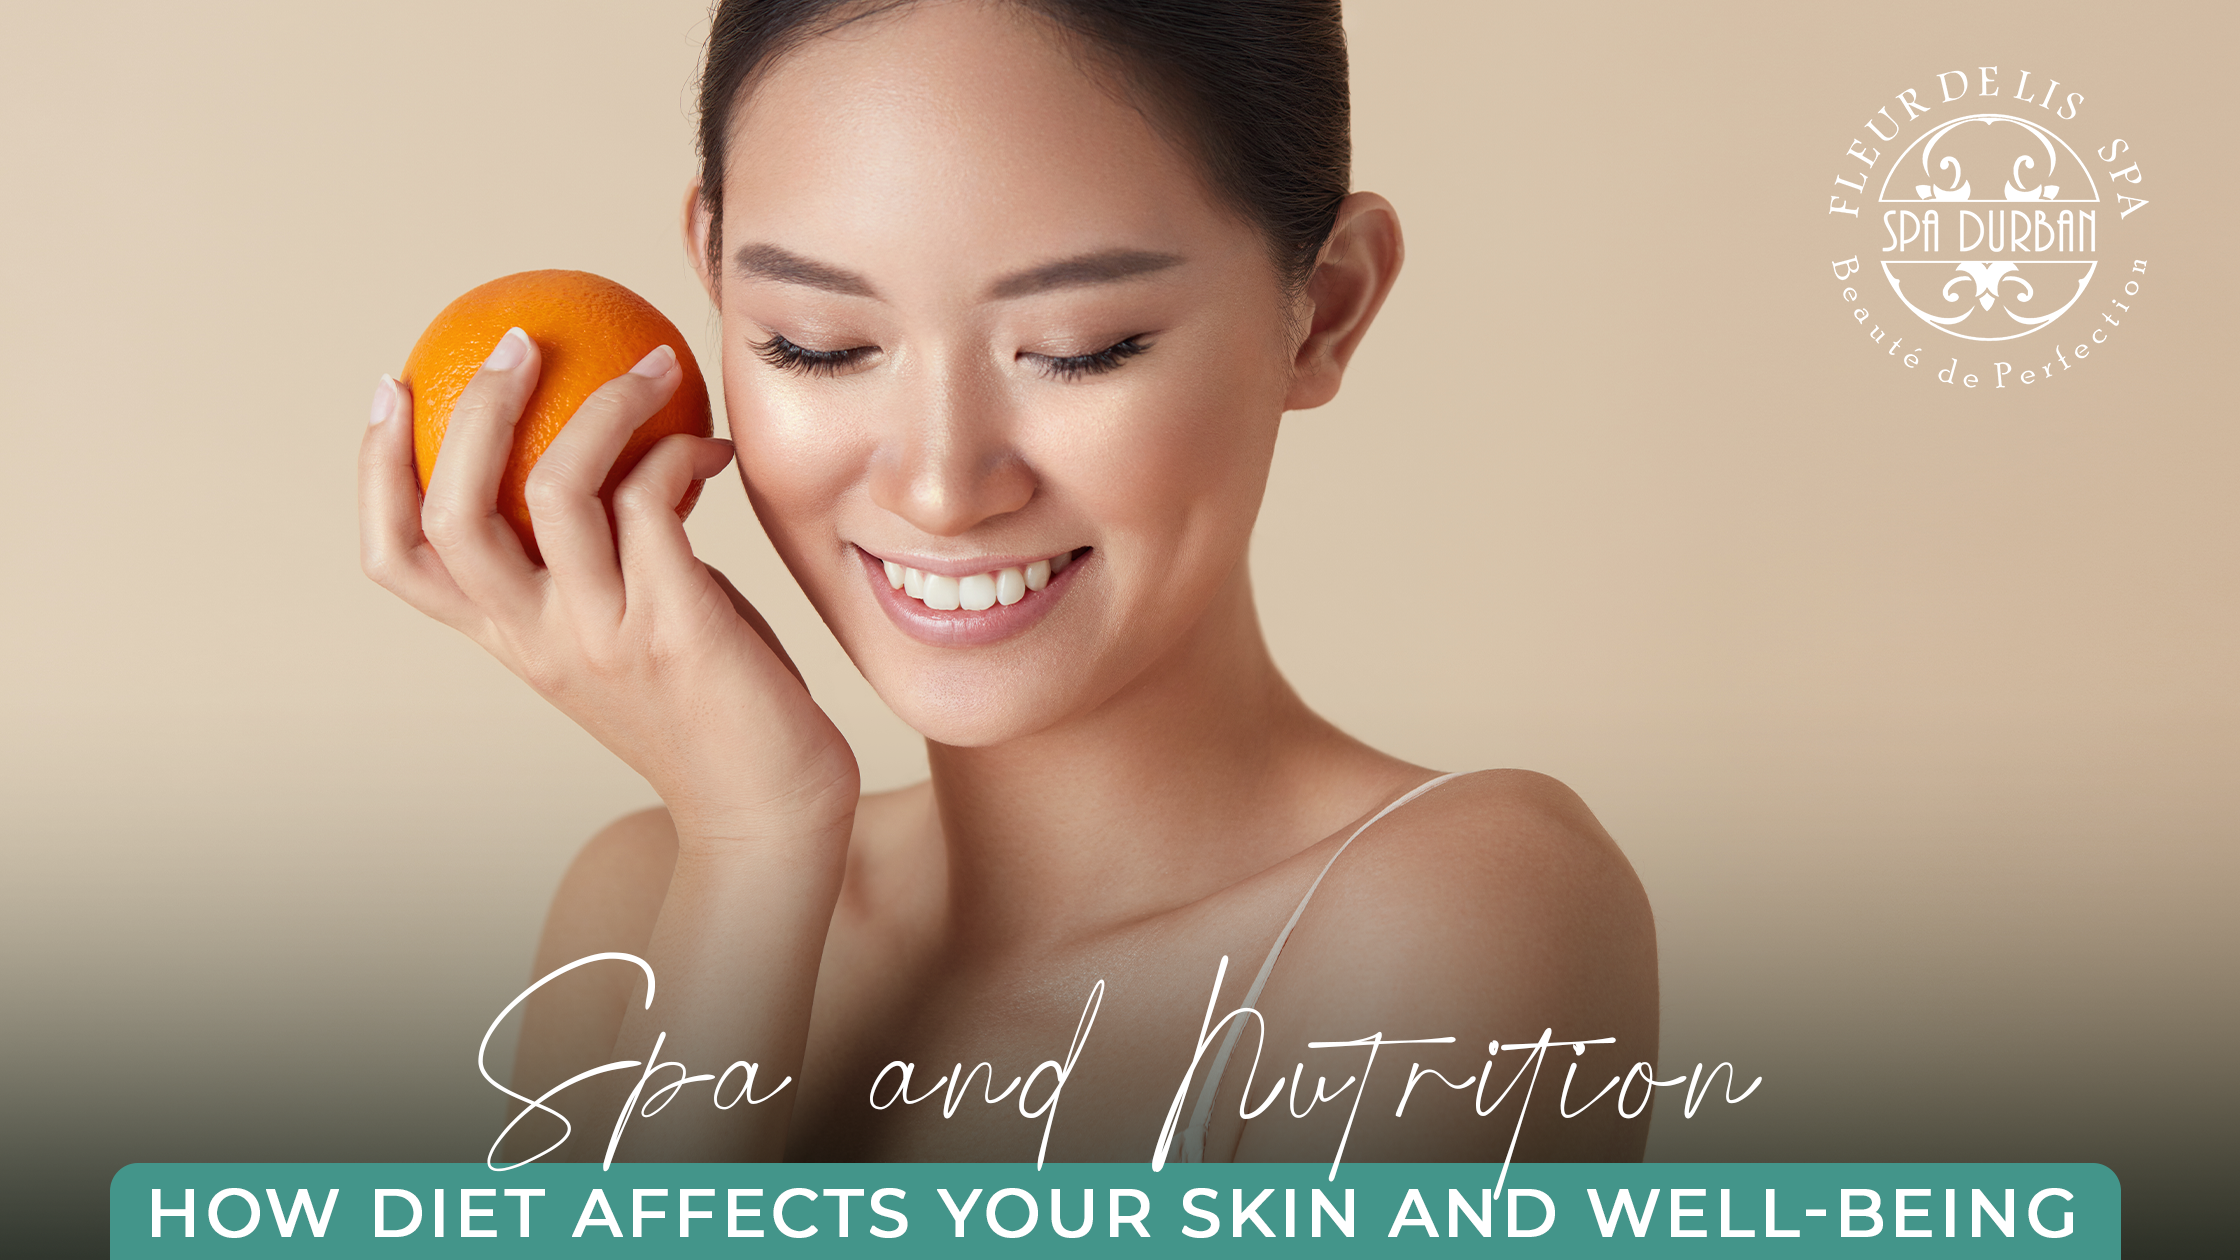 Spa and Nutrition: How Diet Affects Your Skin and Well-Being